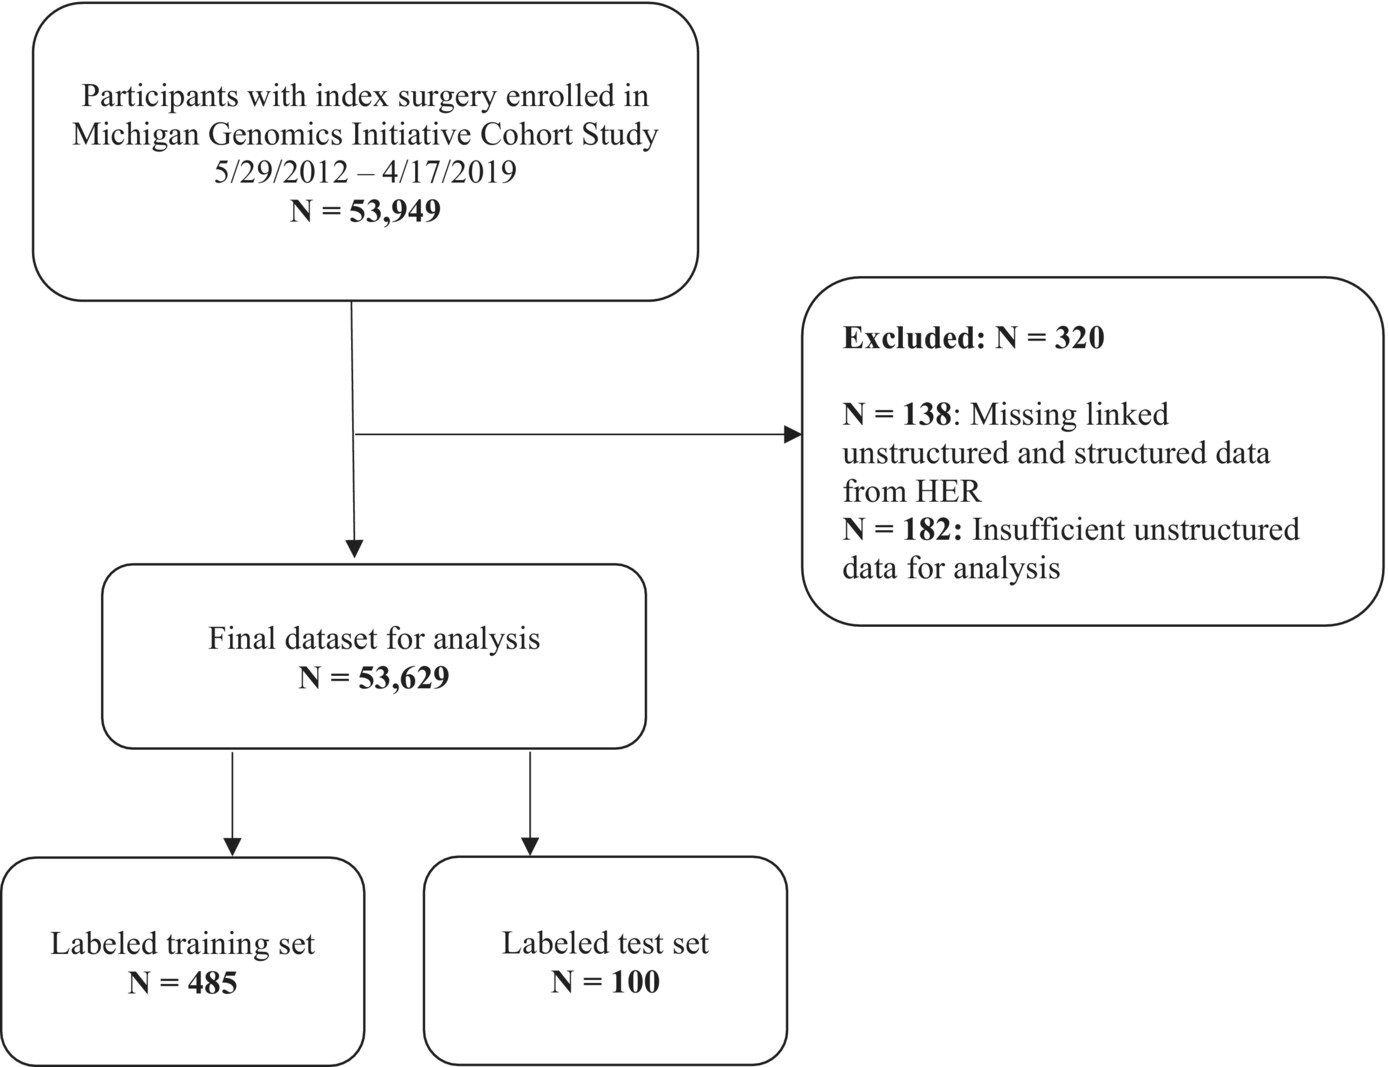 Researchers conducted an observational cohort study among preoperative patients enrolled in the Michigan Genomic Initiative